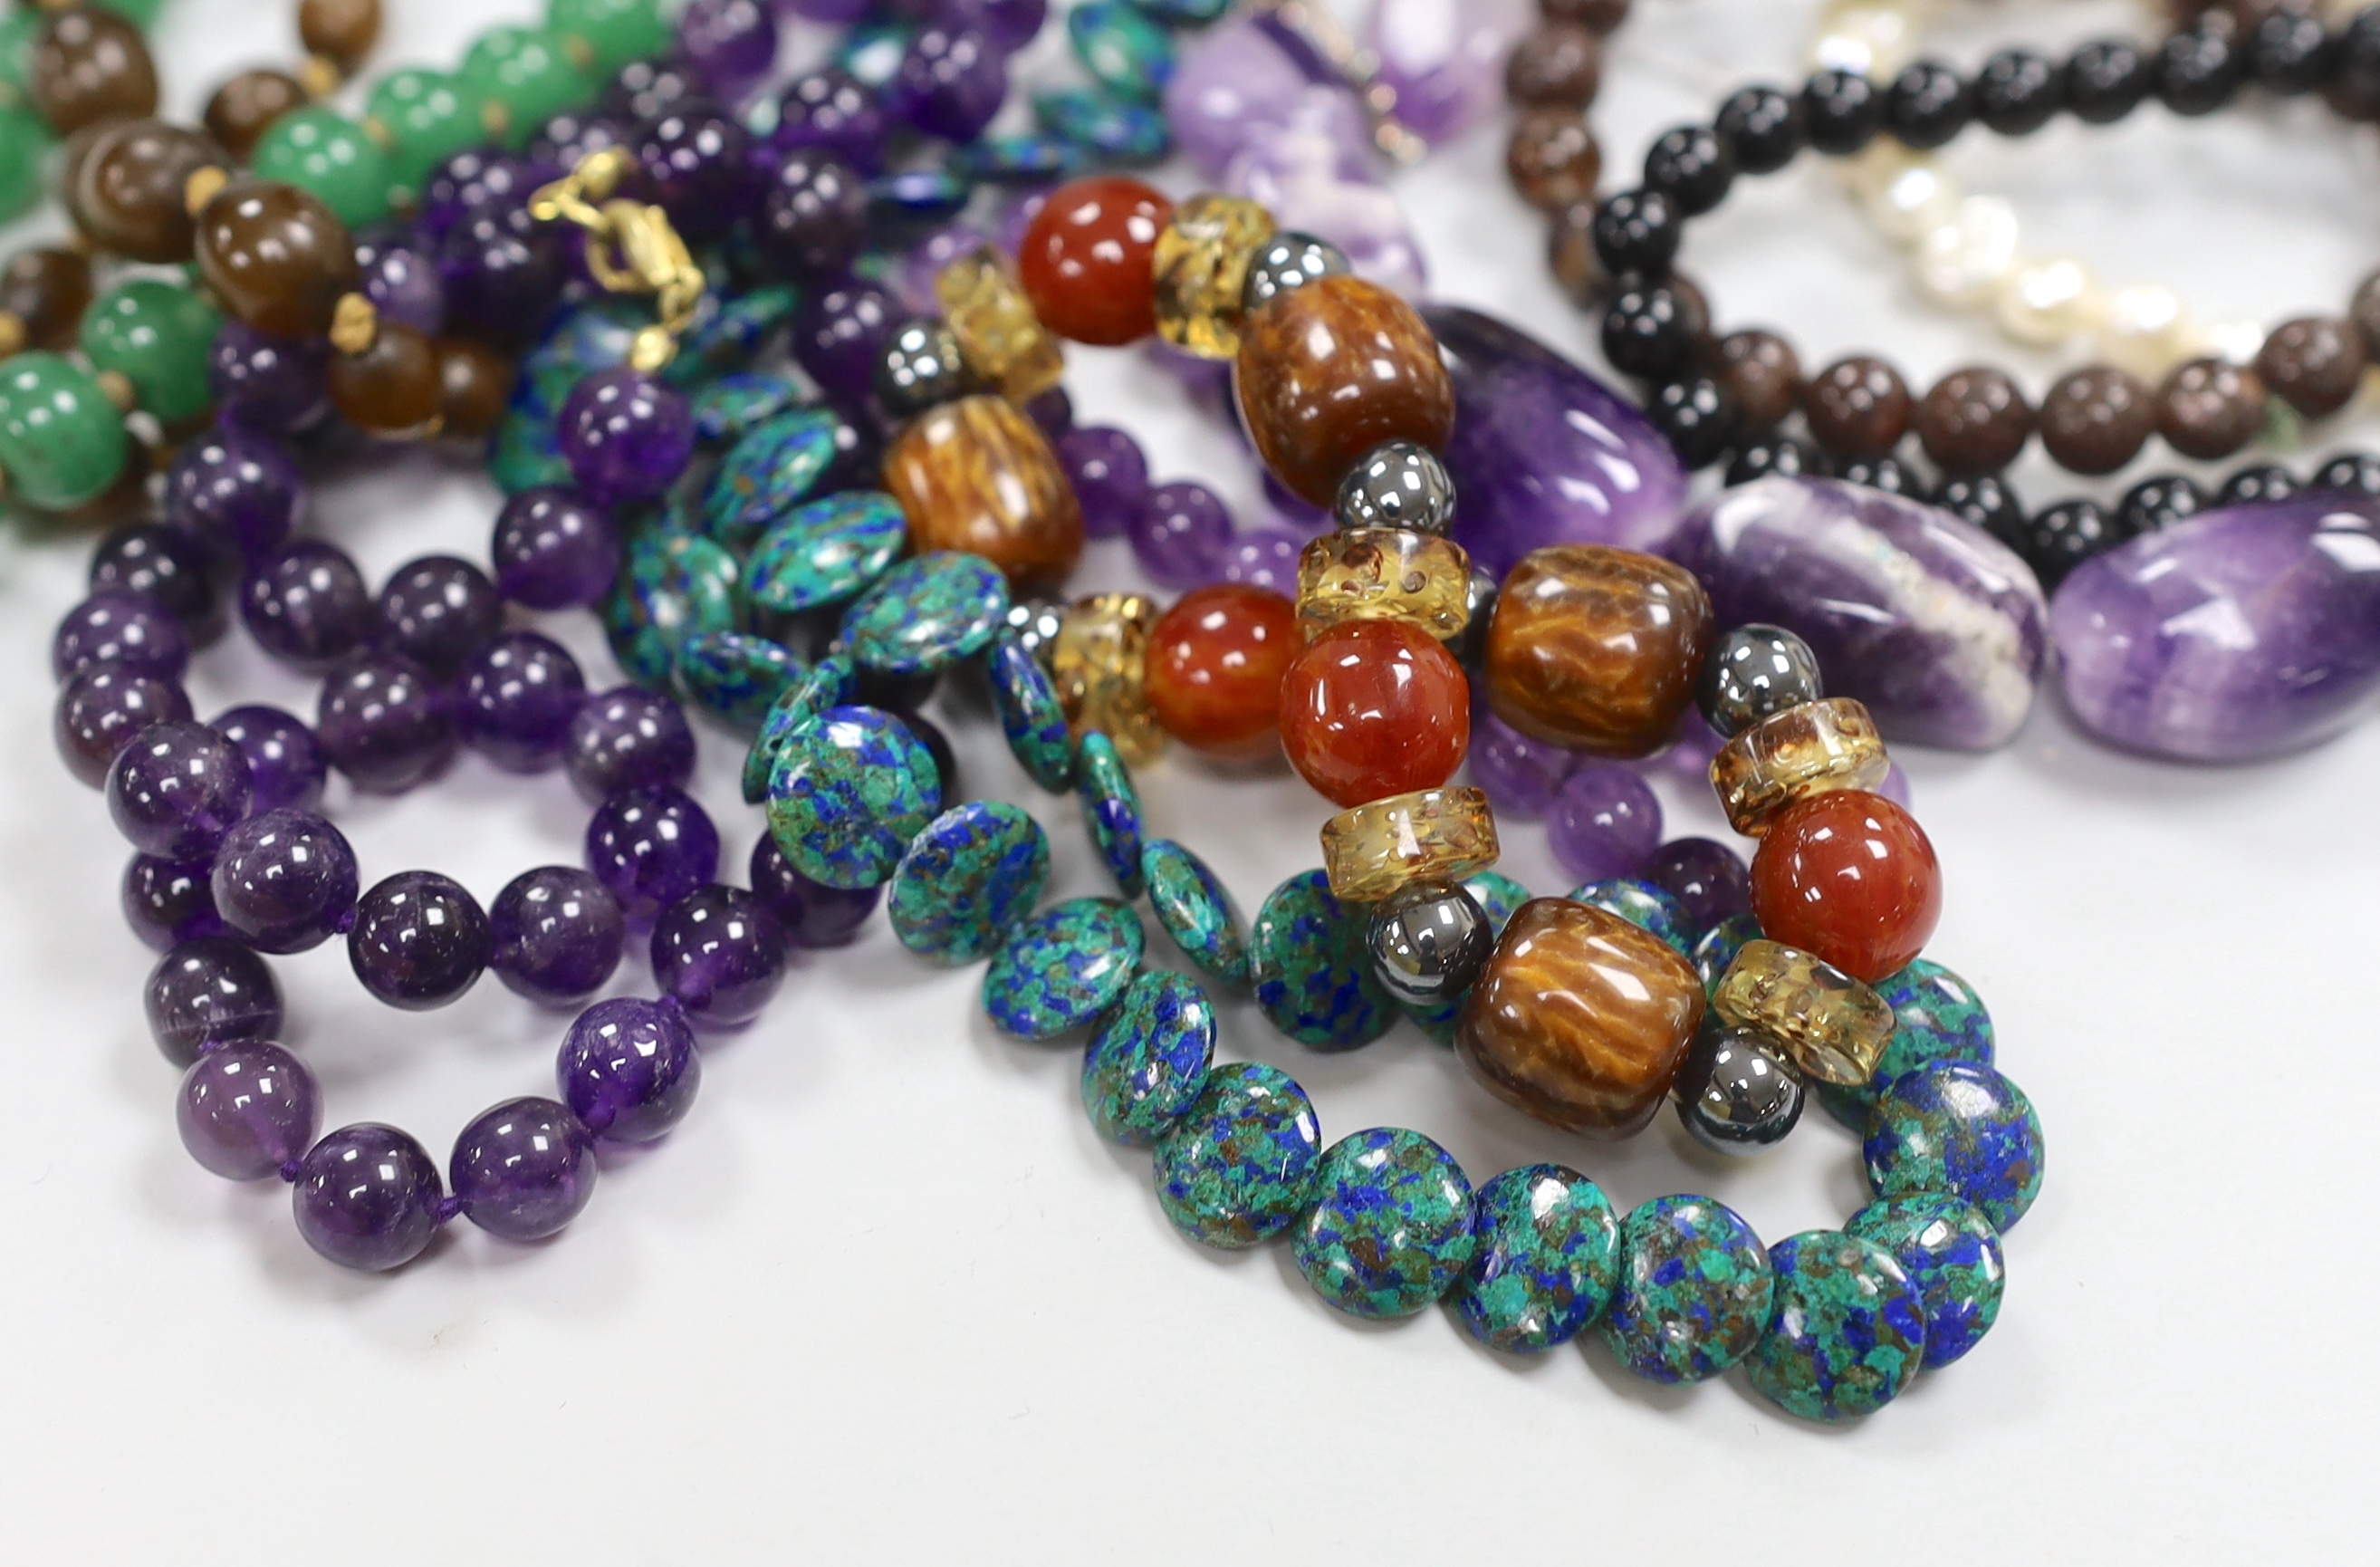 A group of assorted bead necklaces